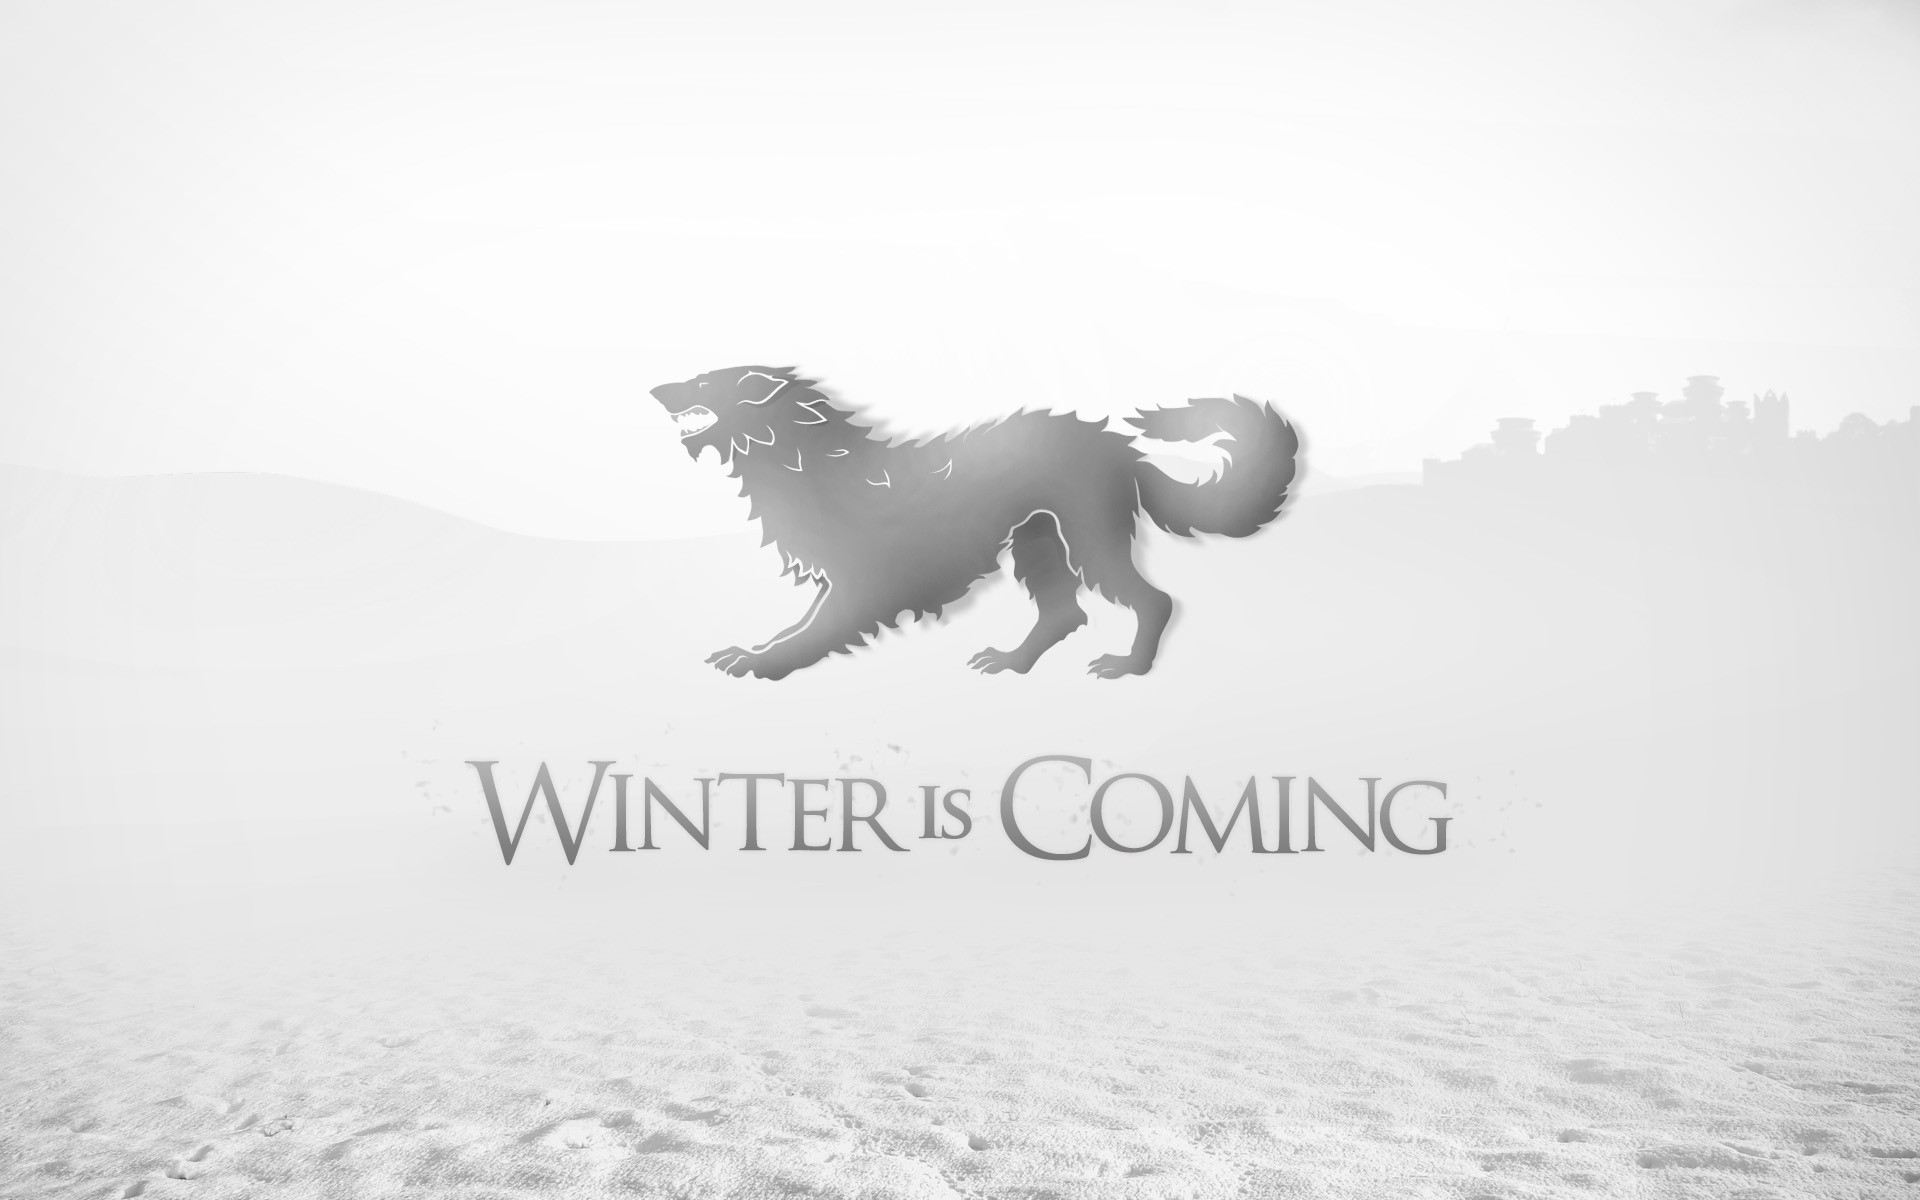 Game Of Thrones, House Stark, Winter Is Coming Wallpaper